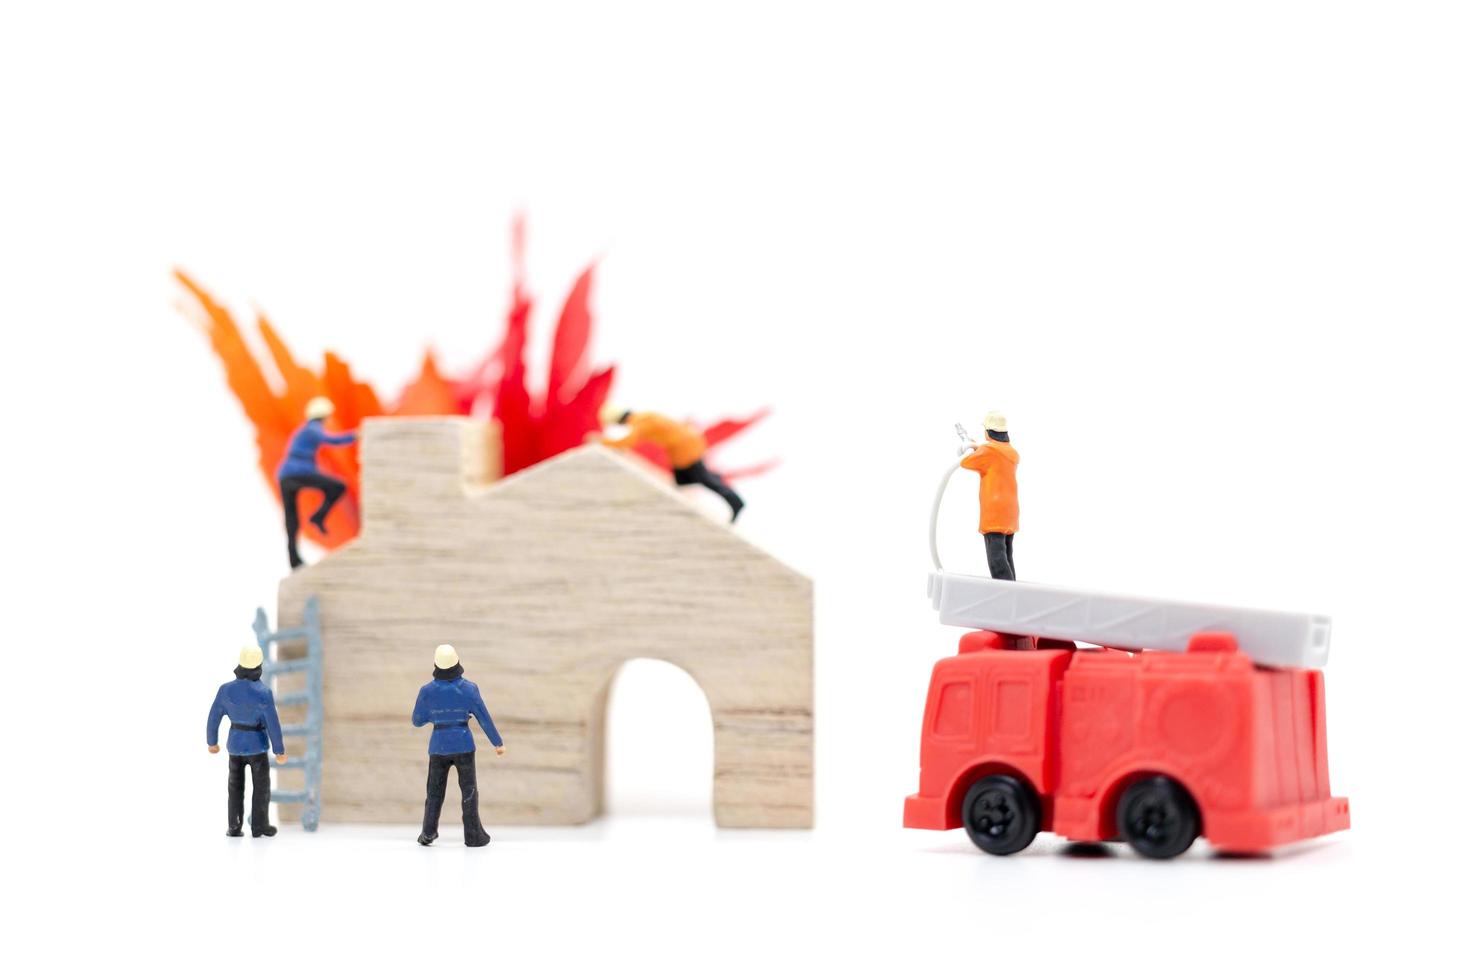 Miniature firefighters taking care of a fire emergency at a wooden house photo